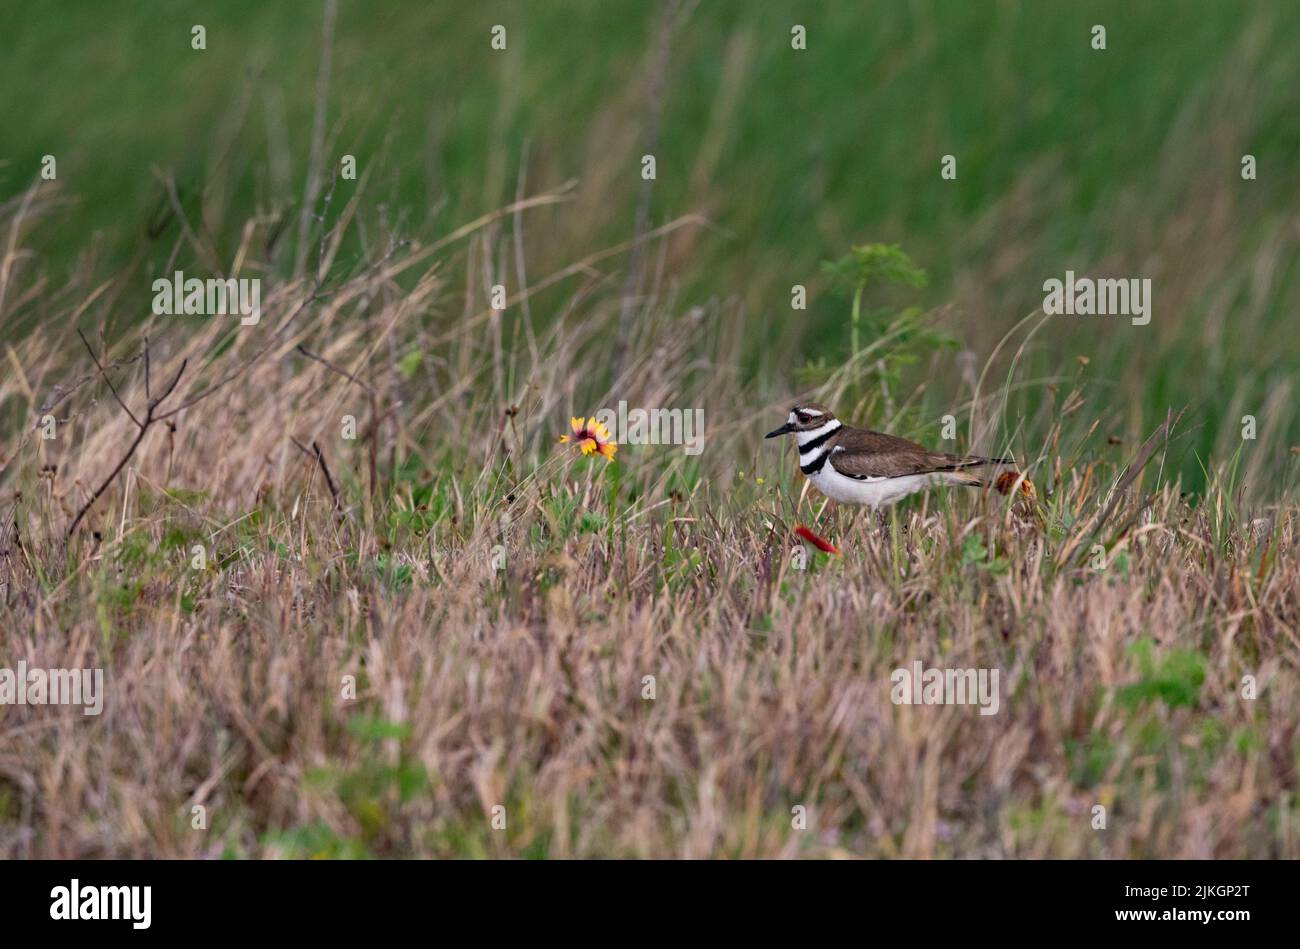 Killdeer with distinctive double breast bands visible stands in flora of Sabine National Wildlife Refuge in Louisiana, United States Stock Photo